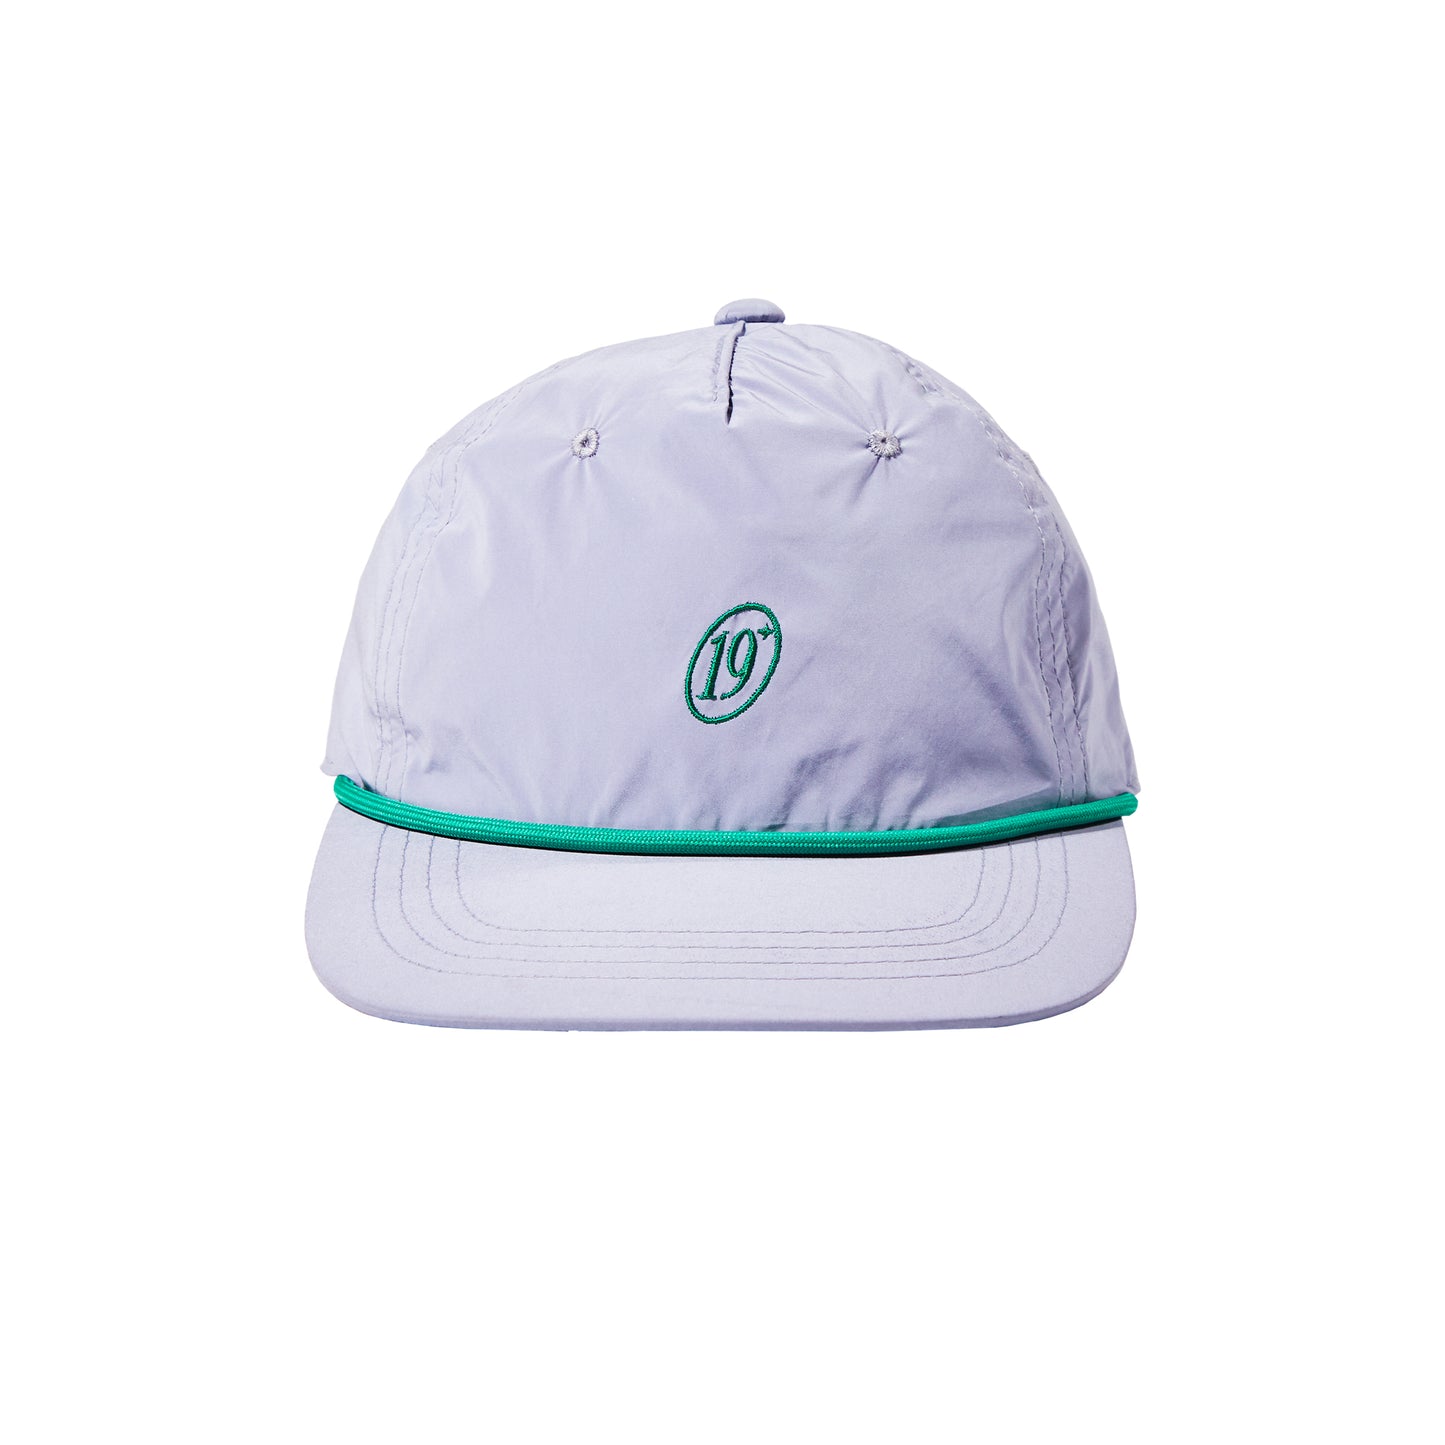 Loom 1 Only Golf Forgives Cap